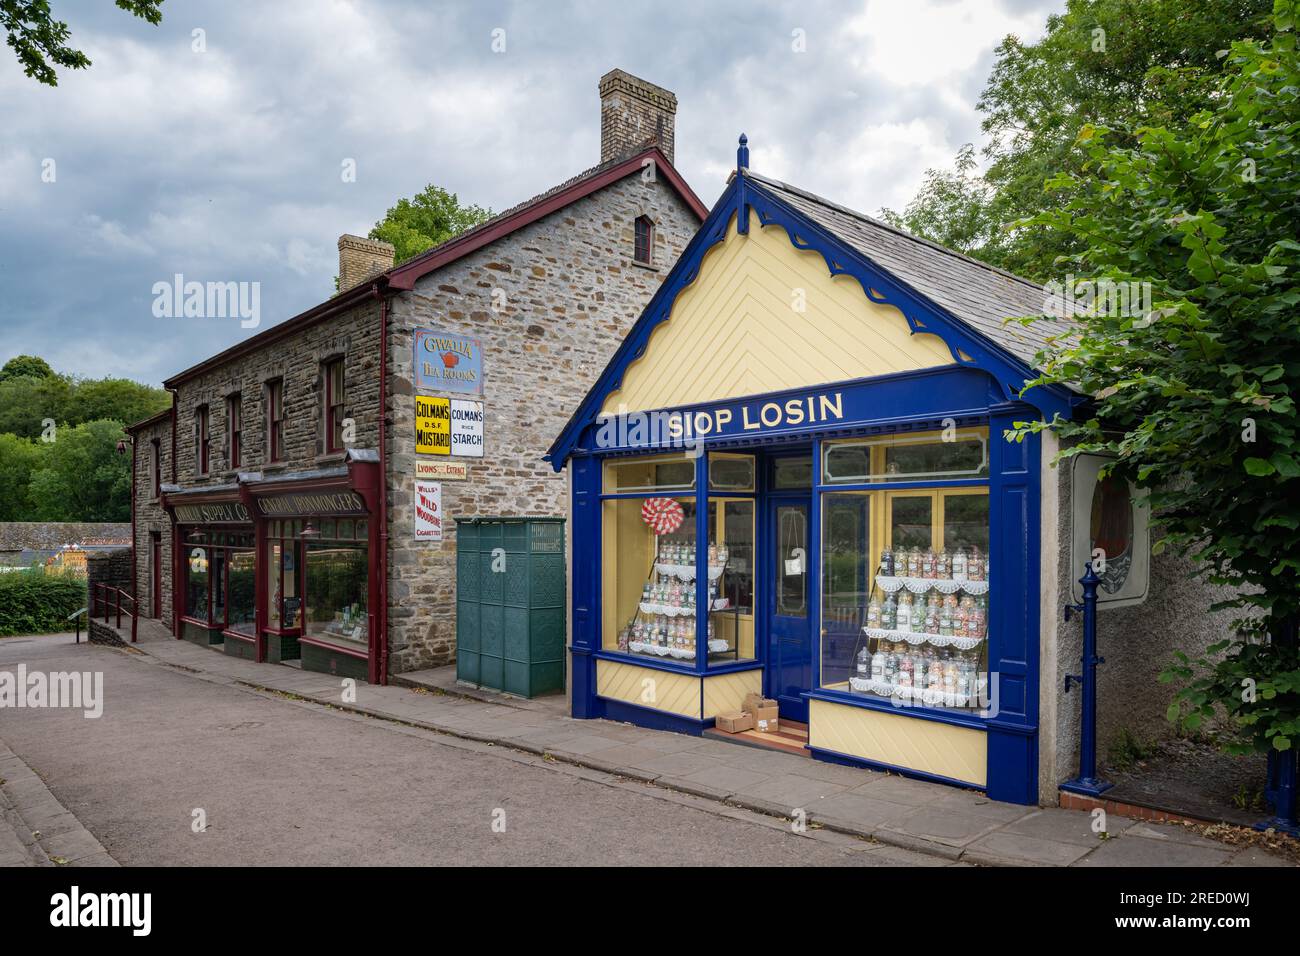 Siop Losin (Sweet shop), St. Fagans National Museum of History, Cardiff, Wales, UK Stock Photo